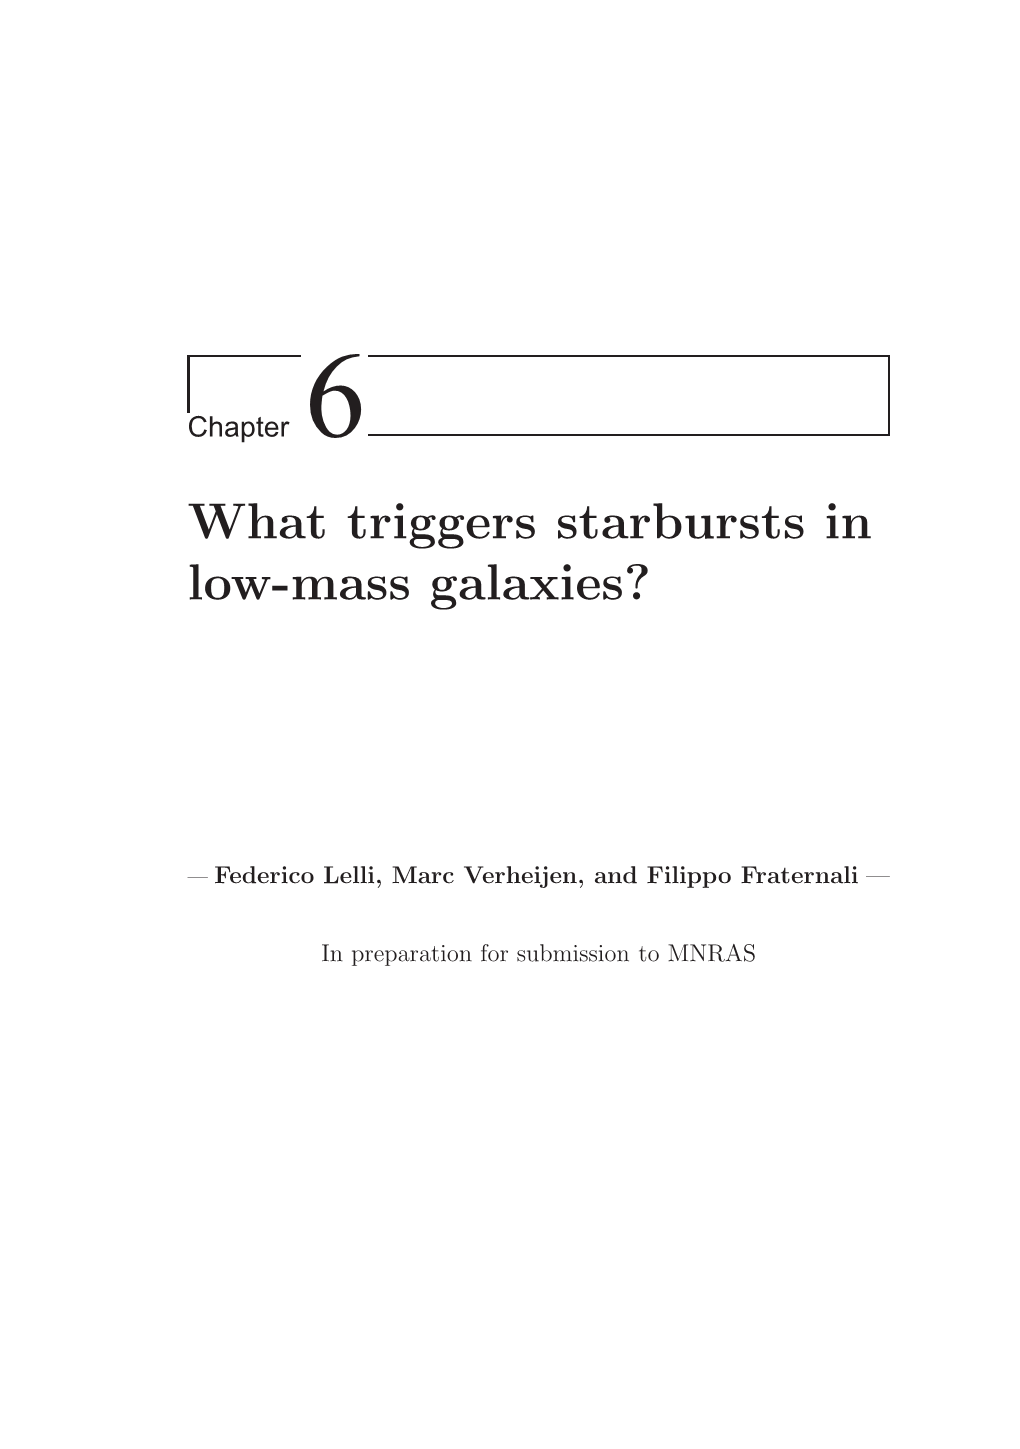 What Triggers Starbursts in Low-Mass Galaxies?